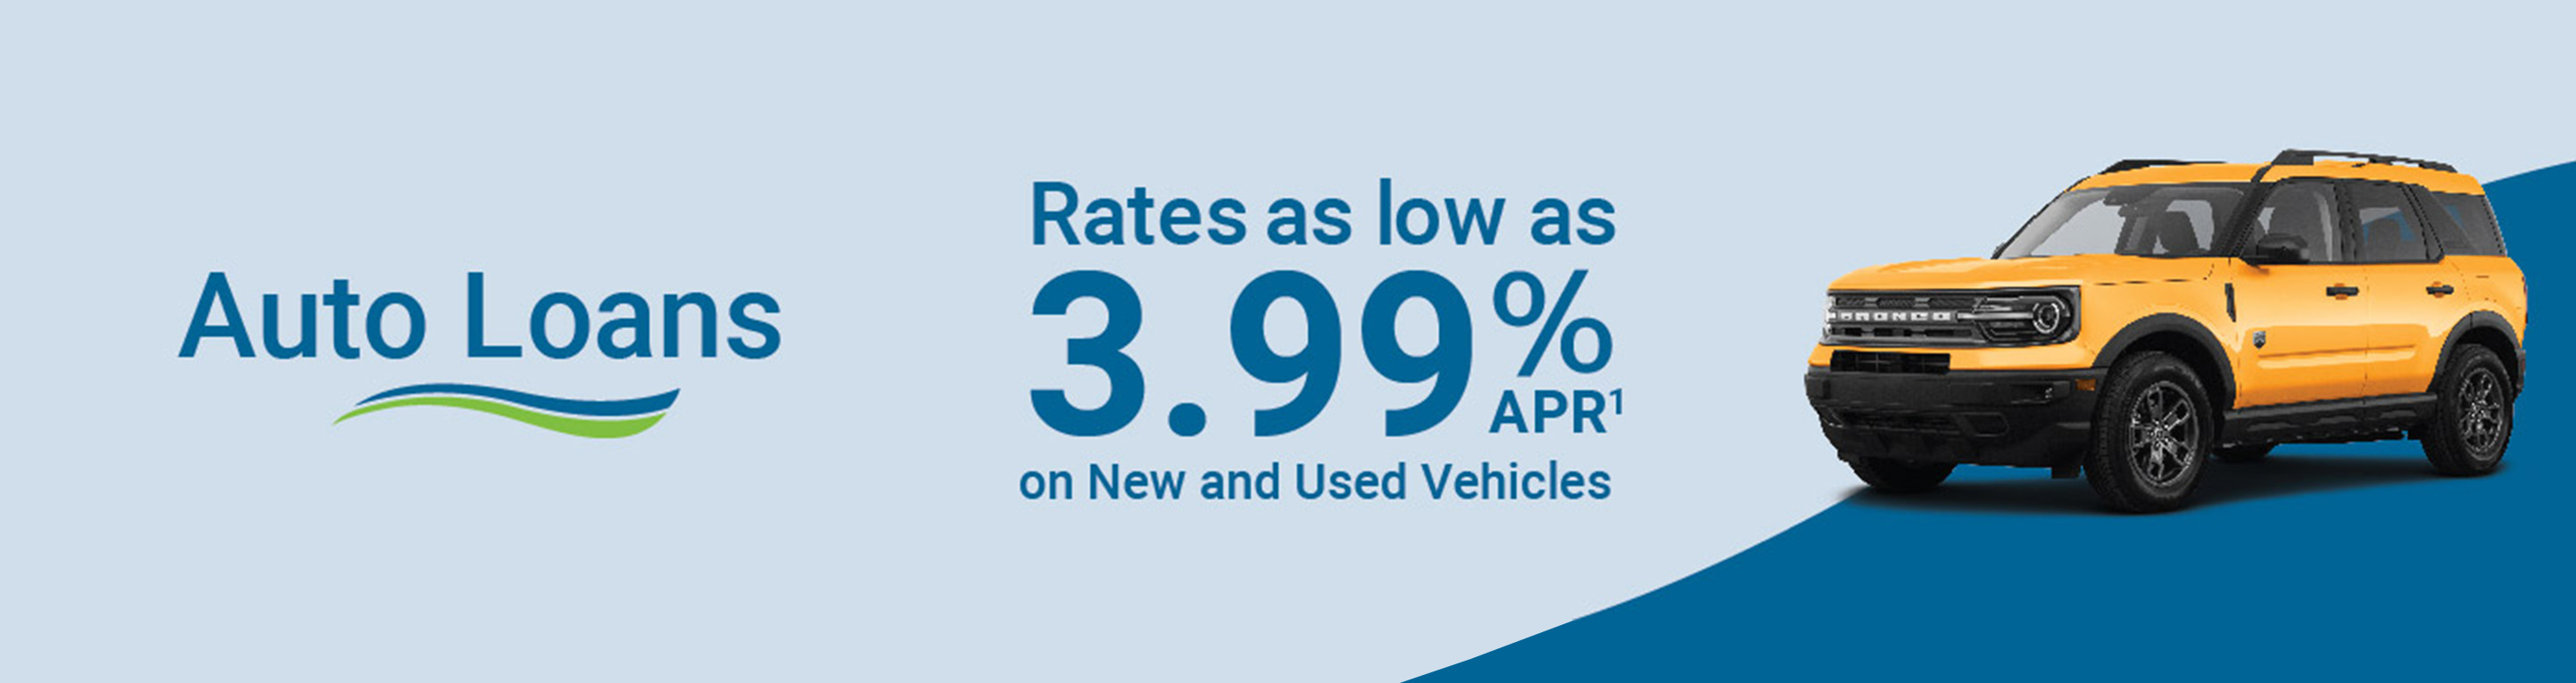 Auto Loans. Rates as low as 3.99% APR on New and Used Vehicles.